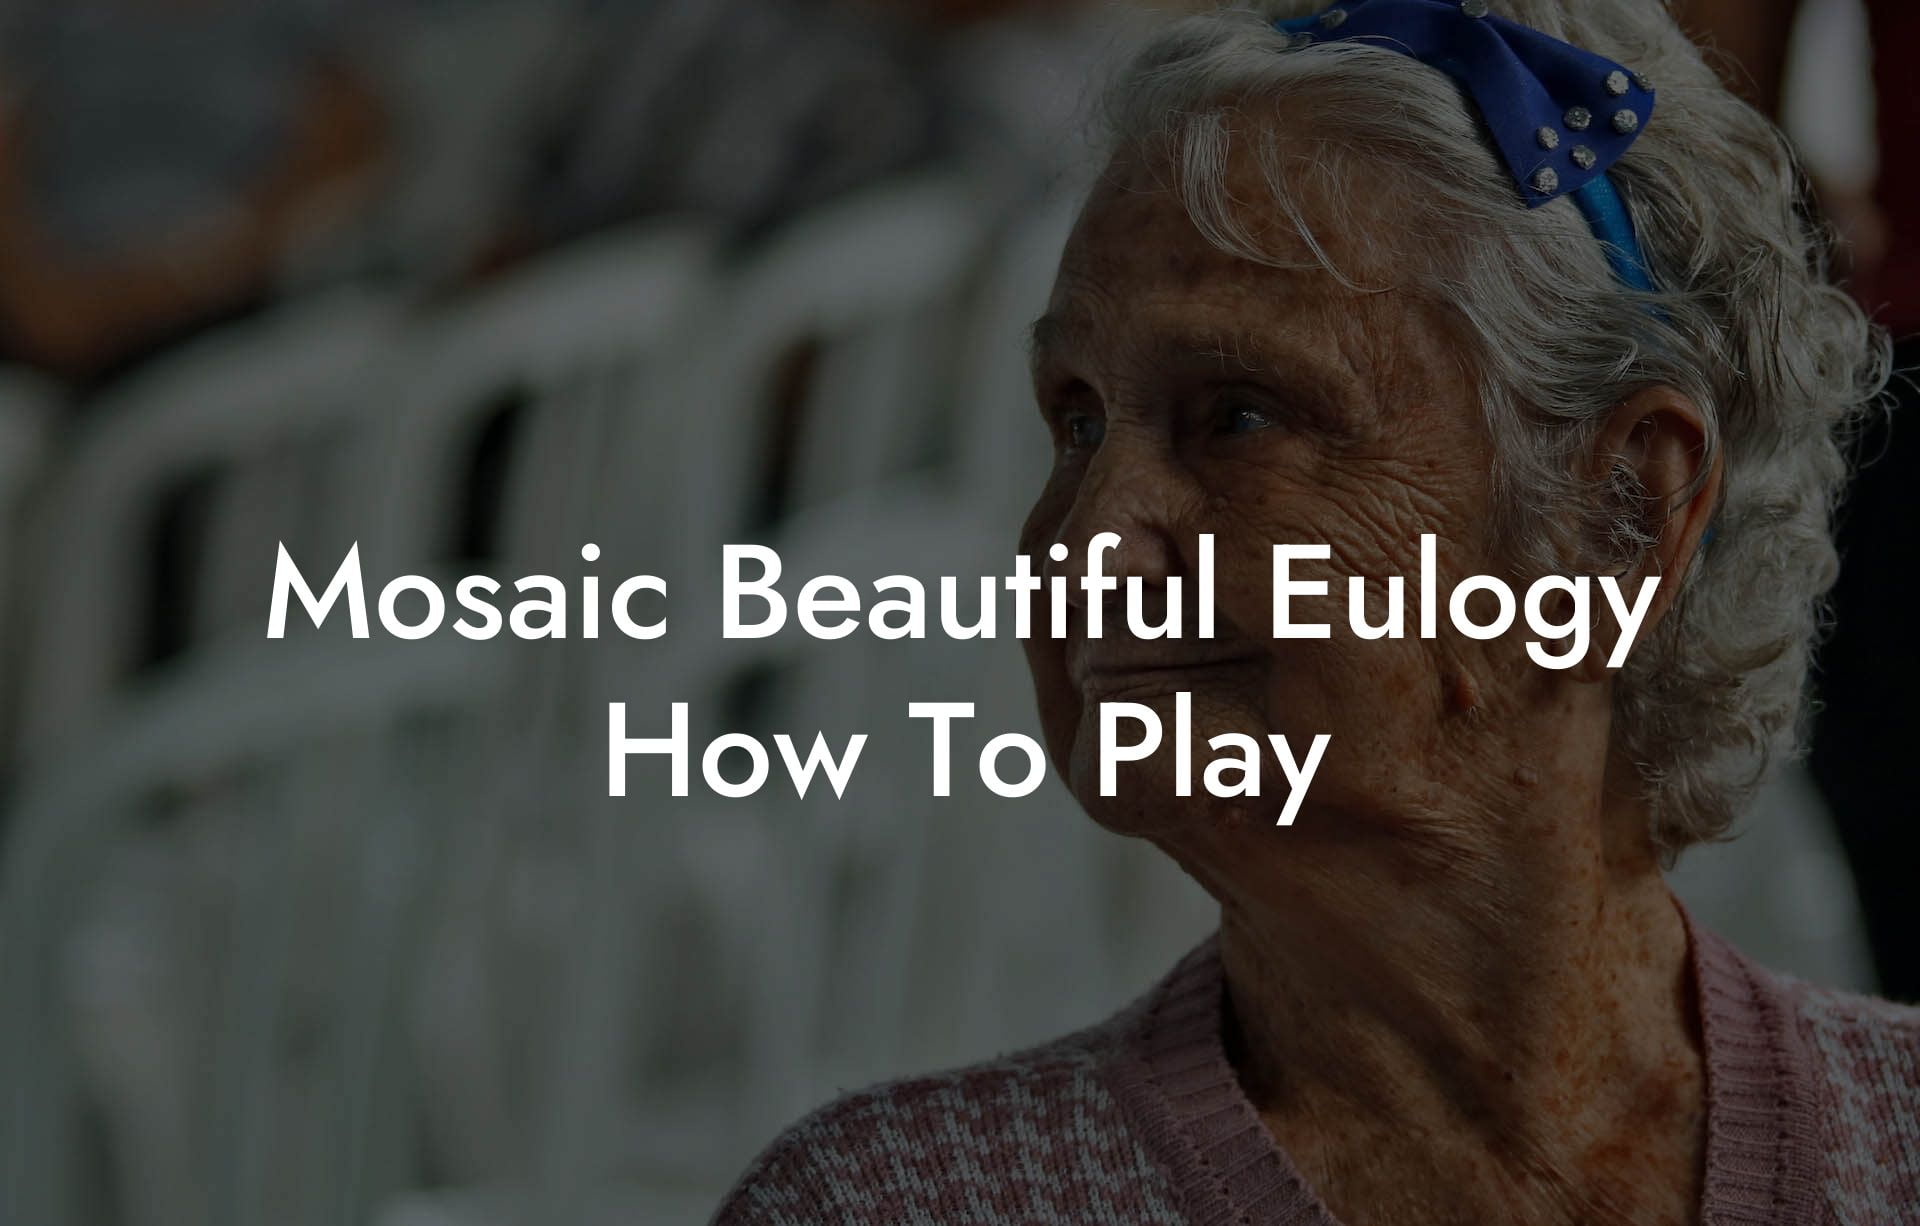 Mosaic Beautiful Eulogy How To Play